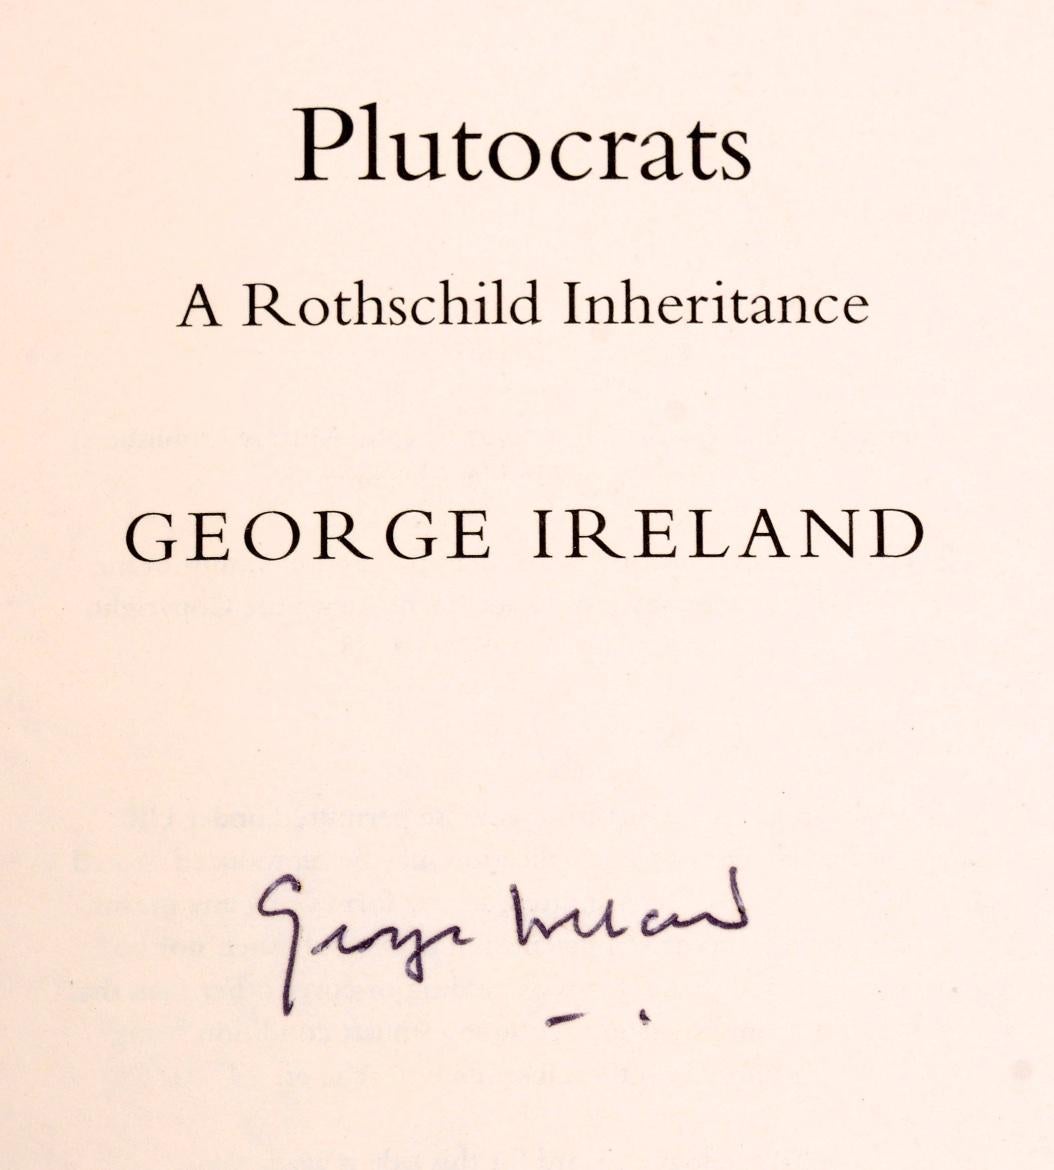 Plutocrats: A Rothschild Inheritance by George Ireland. John Murray, (London), 2007. Signed First edition, first printing hardcover with dust jacket . 432 pages. With black-and-white and color illustrations. Signed by the author on the title page.